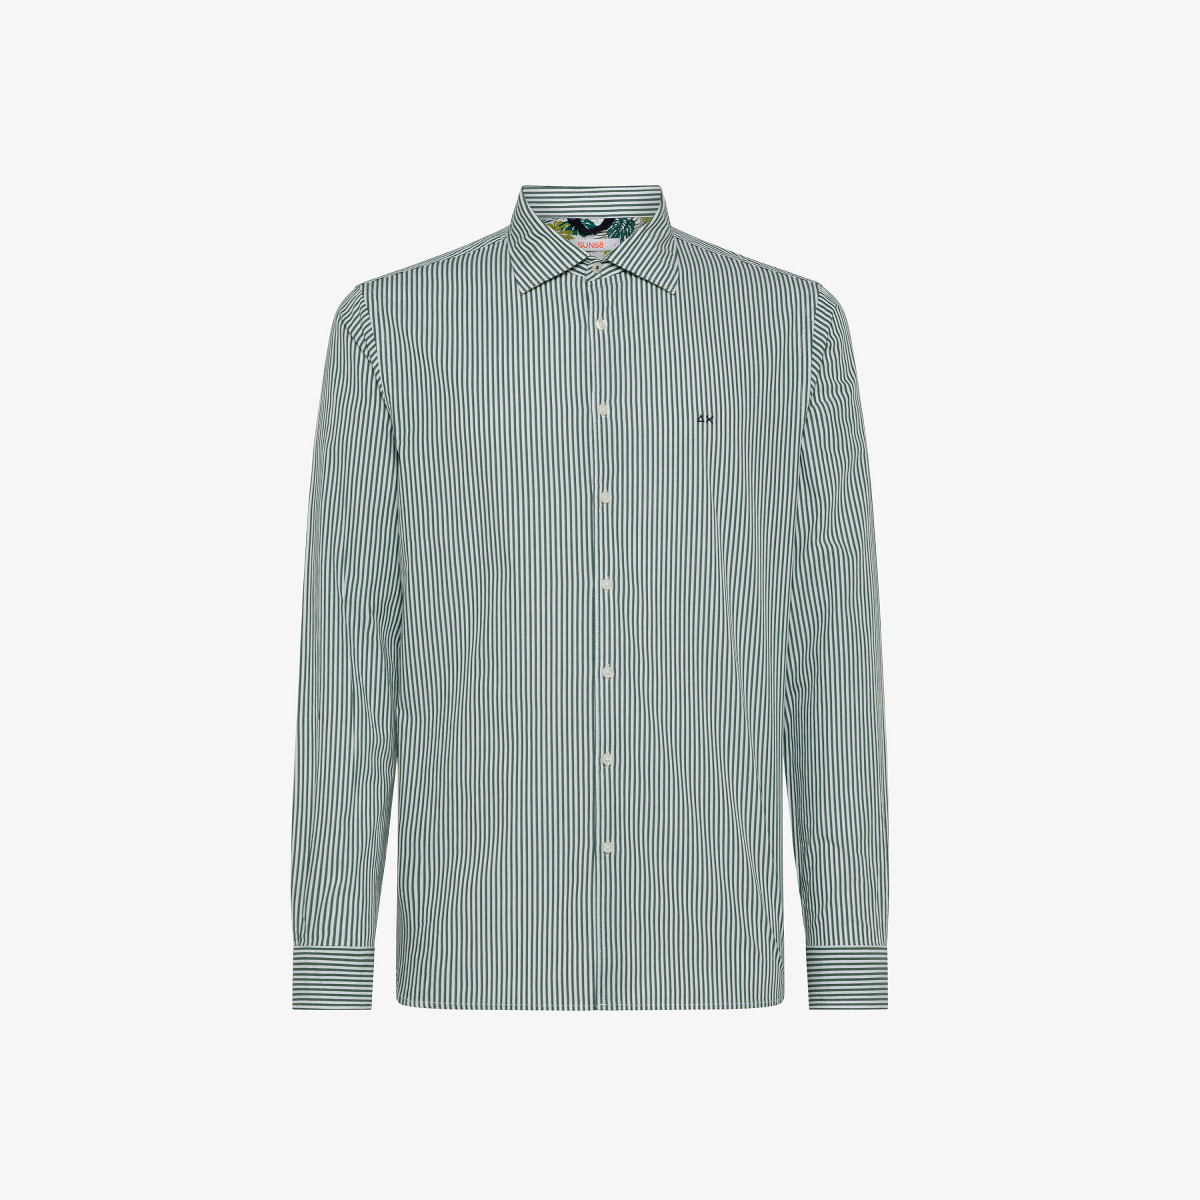 SHIRT FANCY WITH DETAIL MILITARE